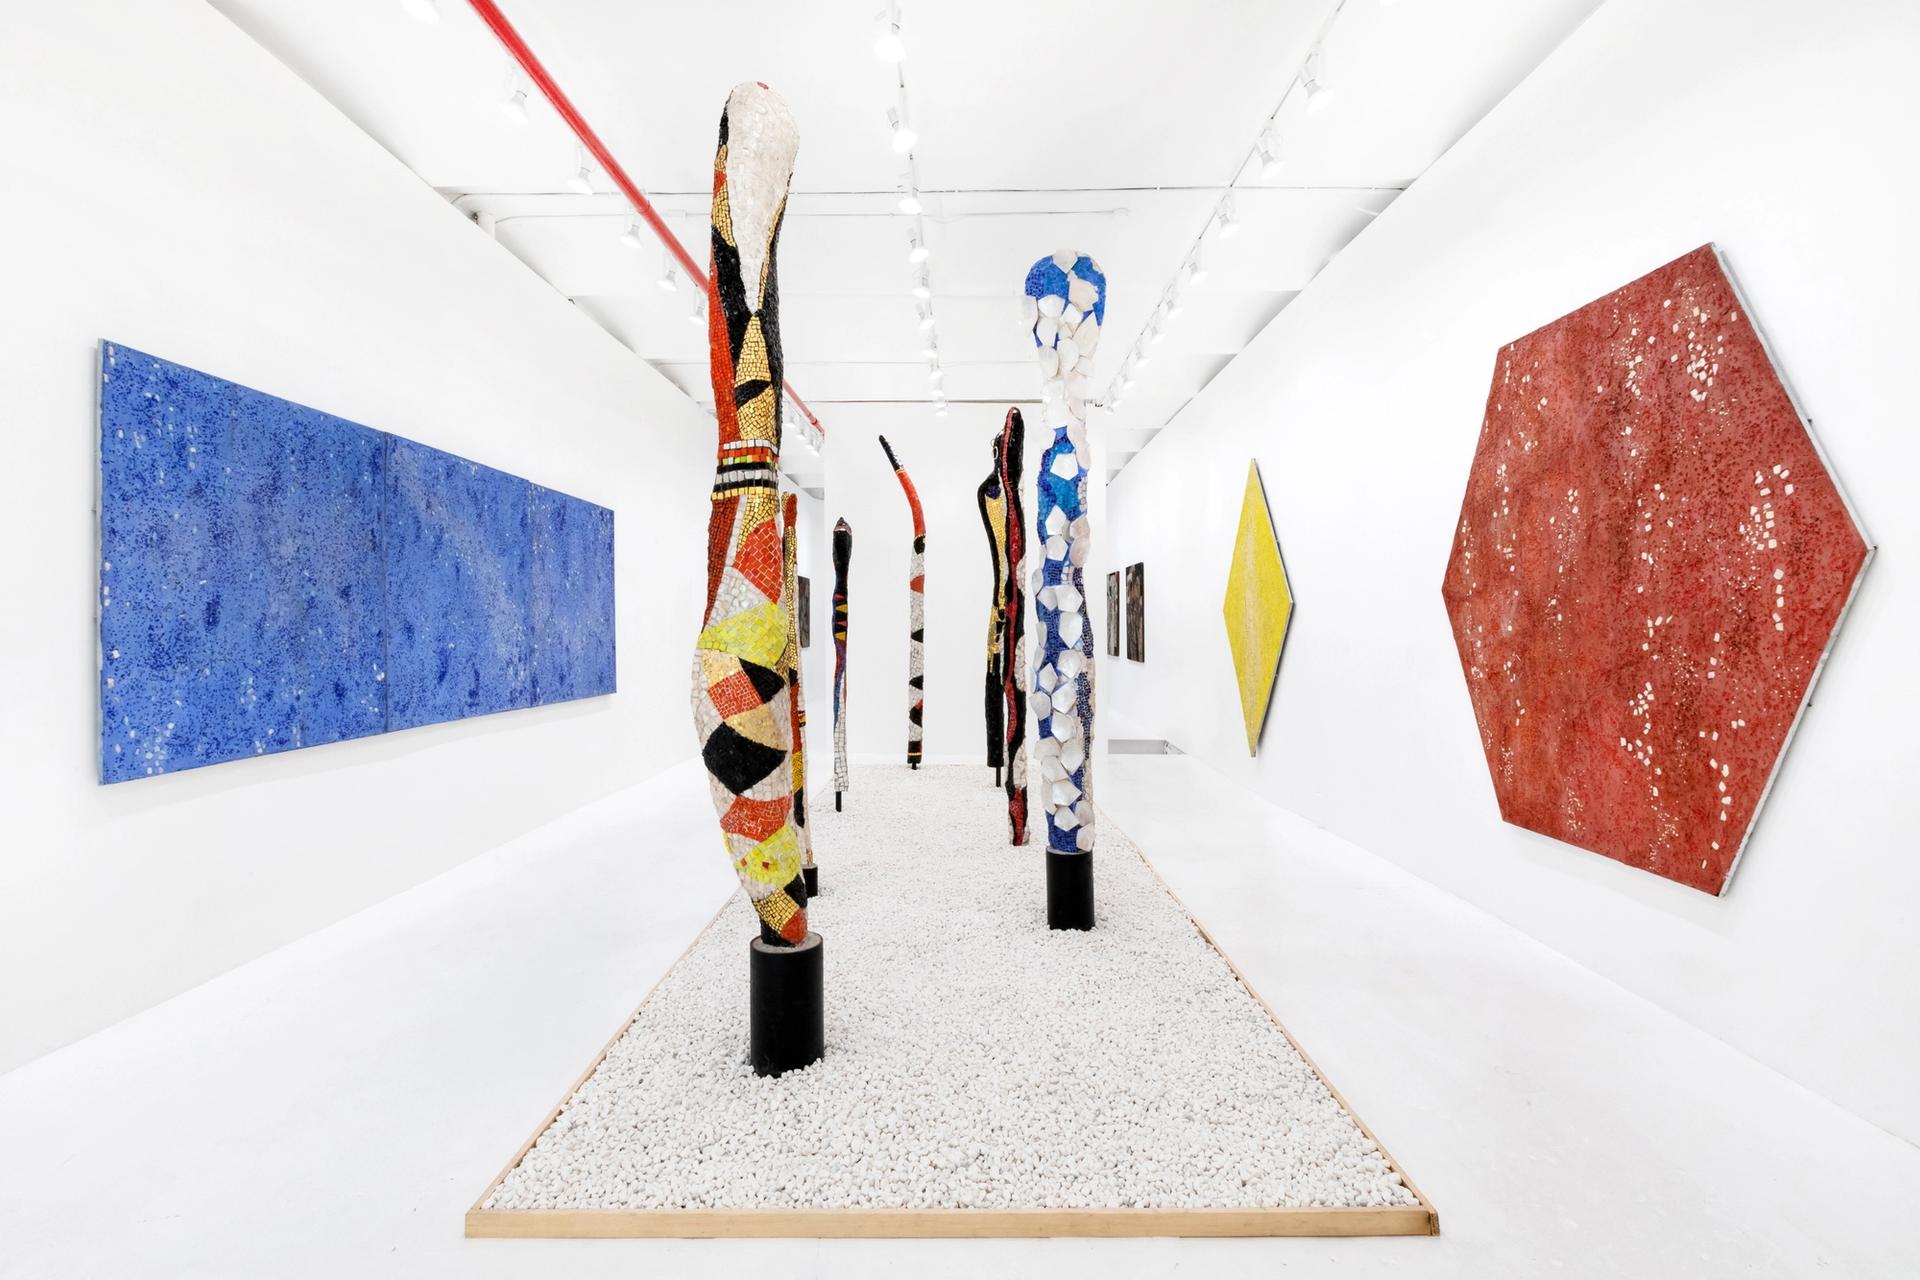 Installation view of Mosaic is Light: Work by Jeanne Reynal, 1940-1970 at Eric Firestone Gallery, New York Courtesy Eric Firestone Gallery  © 2021 Estate of Jeanne Reynal / Artists Rights Society (ARS), New York.Photo: Jenny Gorman